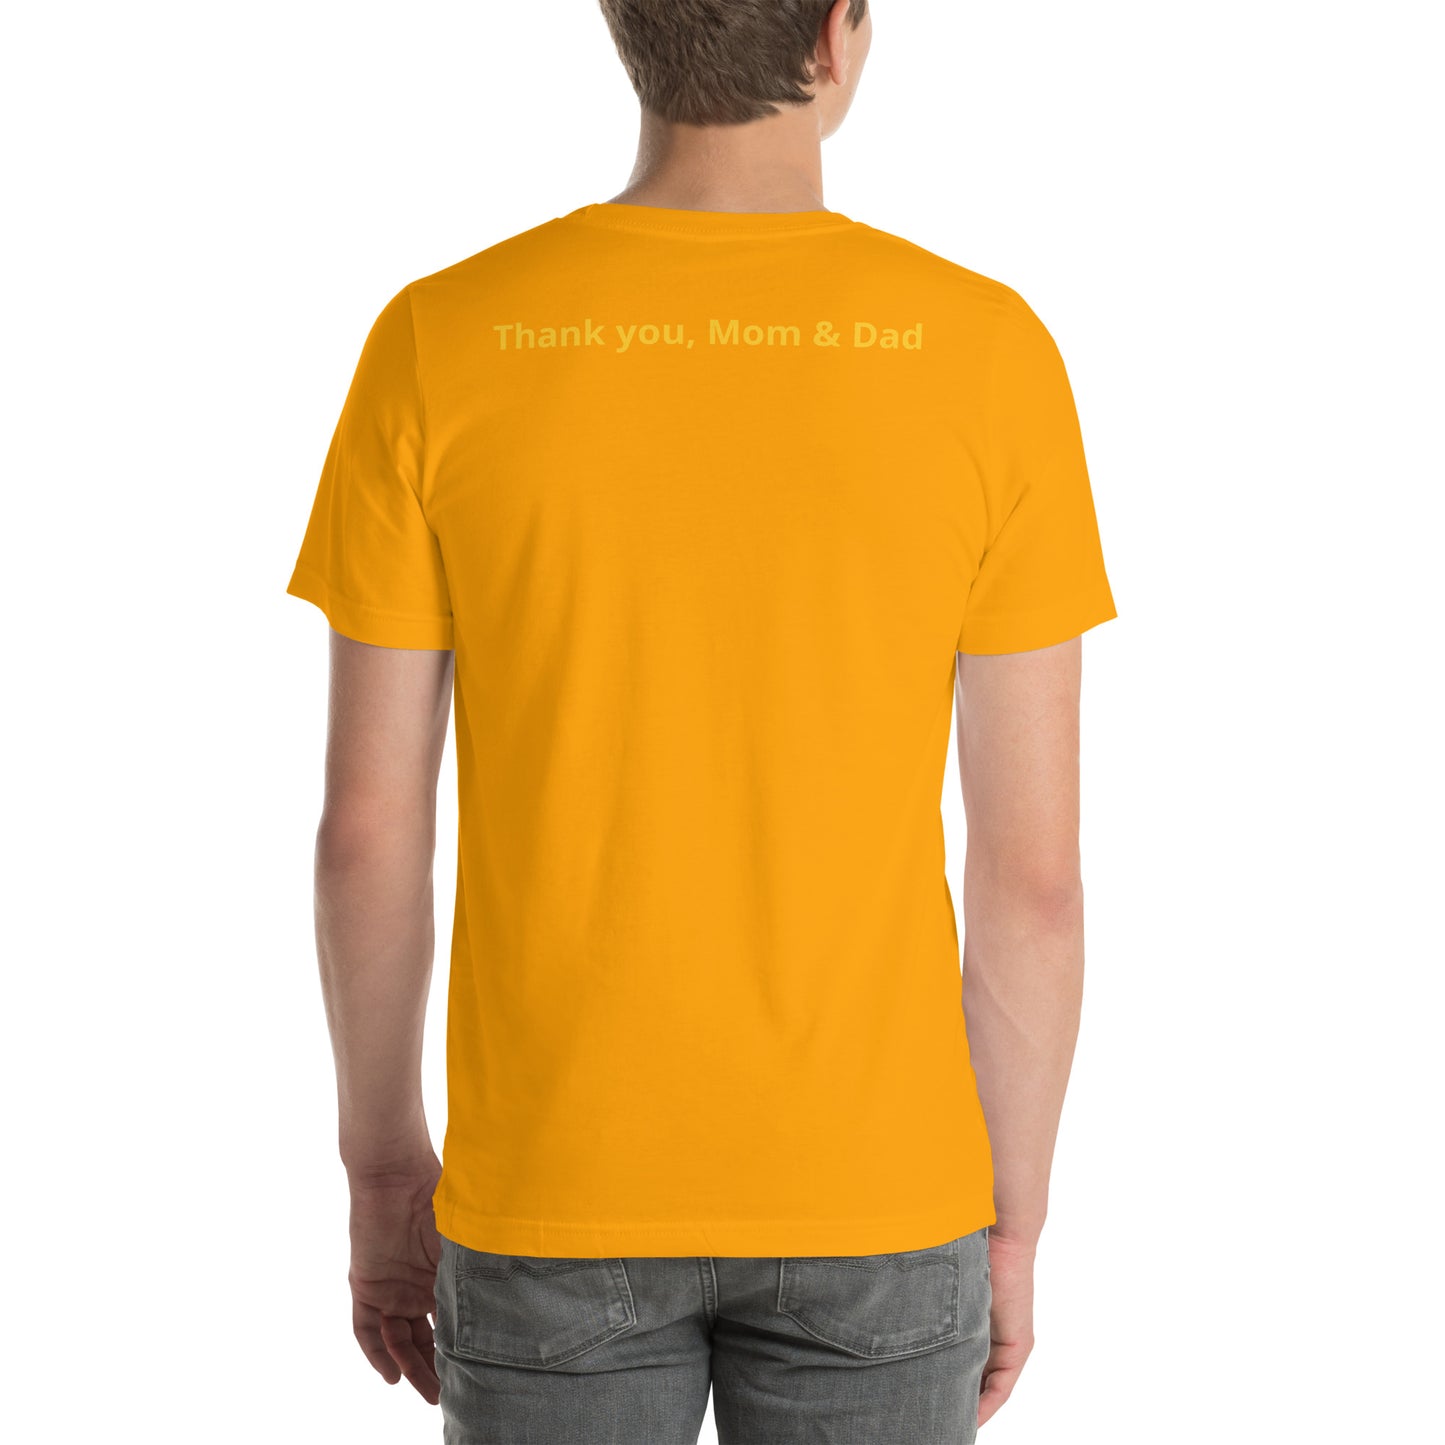 Gold on gold colored short sleeve tee shirt that says "College '24 Grad" on the front and "Thank you, Mom & Dad" on the back in yellow-gold font